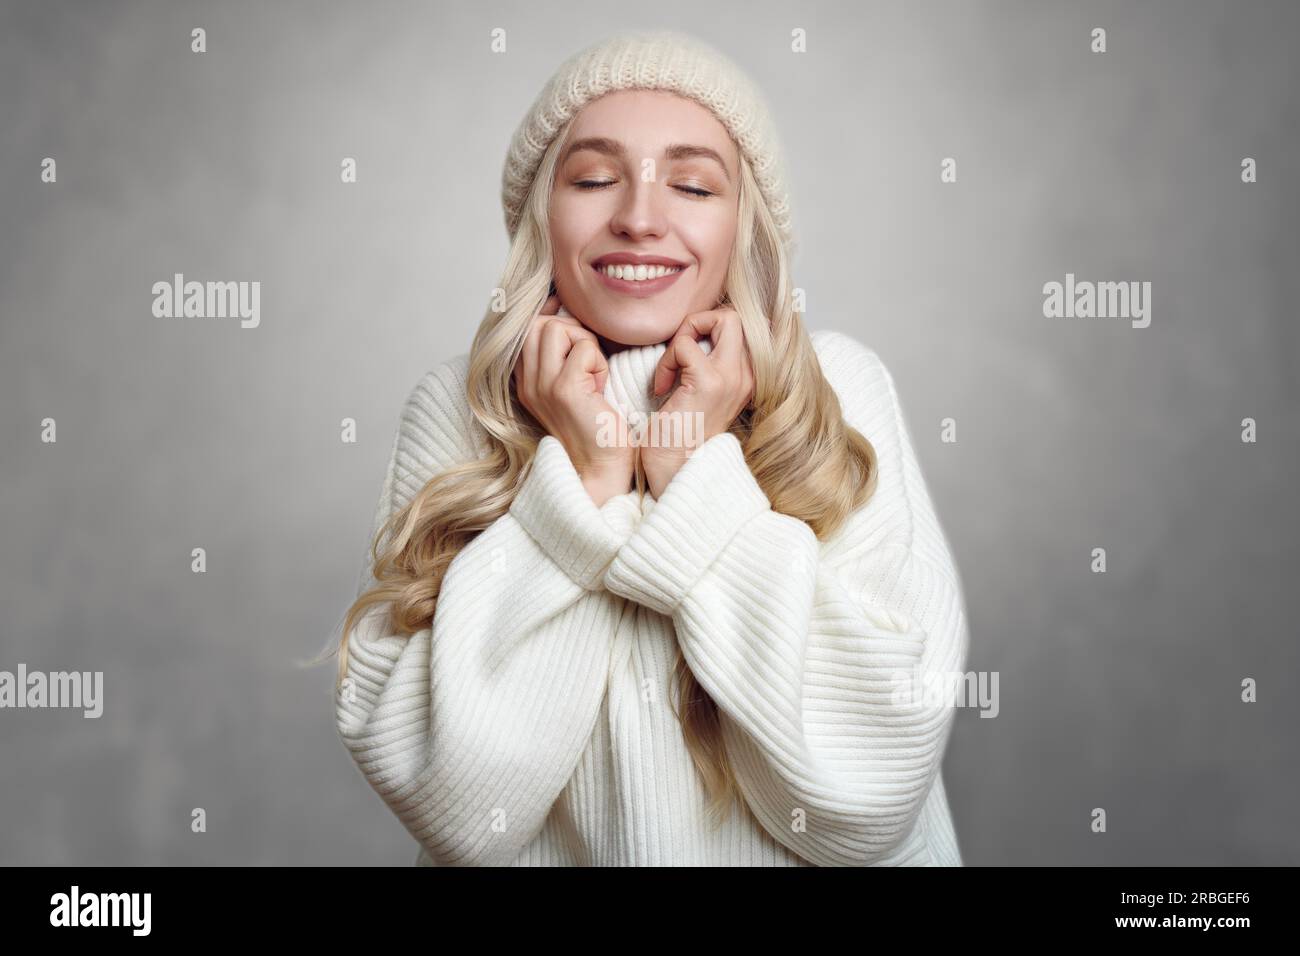 Young blond woman enjoying her white knitted sweater, standing against grey background, with her hands to her neck and smiling with eyes closed Stock Photo